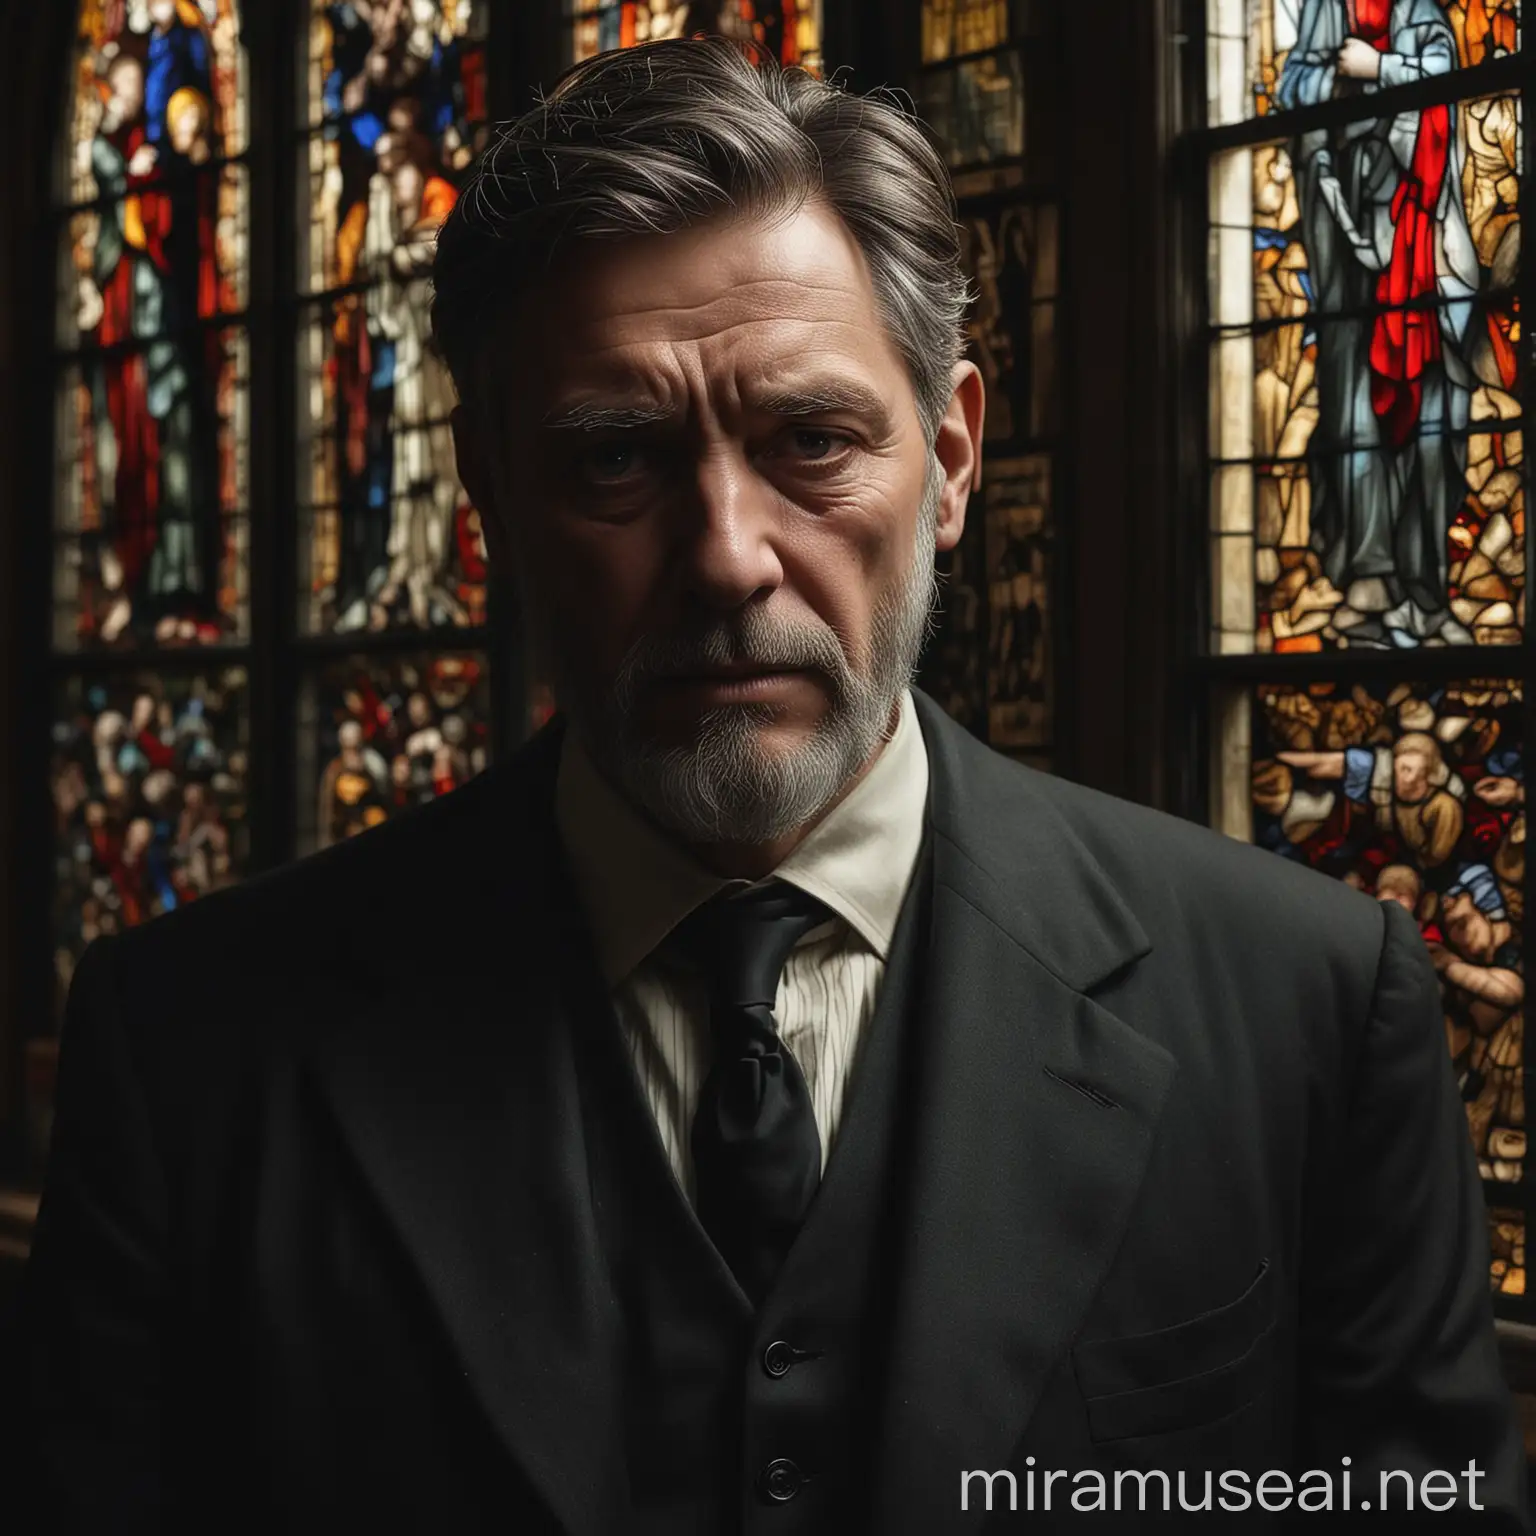 Create a visually striking artwork depicting a dark, somber scene in a dimly lit church library, with traditional stained glass windows as the sole light source. The focal point is a tall, broad, and stocky man in his early 60s, with black hair streaked with silver and a round belly. He is casually dressed in a slightly rumpled suit, exuding a stern and brooding presence.

His face and clothes should be highly realistic, showing details like age lines, wrinkles, and fabric texture. He has small hazel eyes, a large nose, big ears, a rounded face with a double chin, and a short beard. His posture is firm, shoulders back, conveying confidence and strength.

The scene is dark, with the stained glass windows casting colorful, muted hues onto his face and suit, creating an ethereal atmosphere. The interplay of light and shadow enhances his contemplative state, emphasizing solitude and introspection. The windows depict traditional biblical scenes, adding historical and spiritual depth.

The overall palette is dark, with vibrant touches of color from the stained glass. The scene should evoke quiet strength and the enduring role of the "man of the house," highlighted by the sacred light from the stained glass, creating a vivid and immersive experience for the viewer.